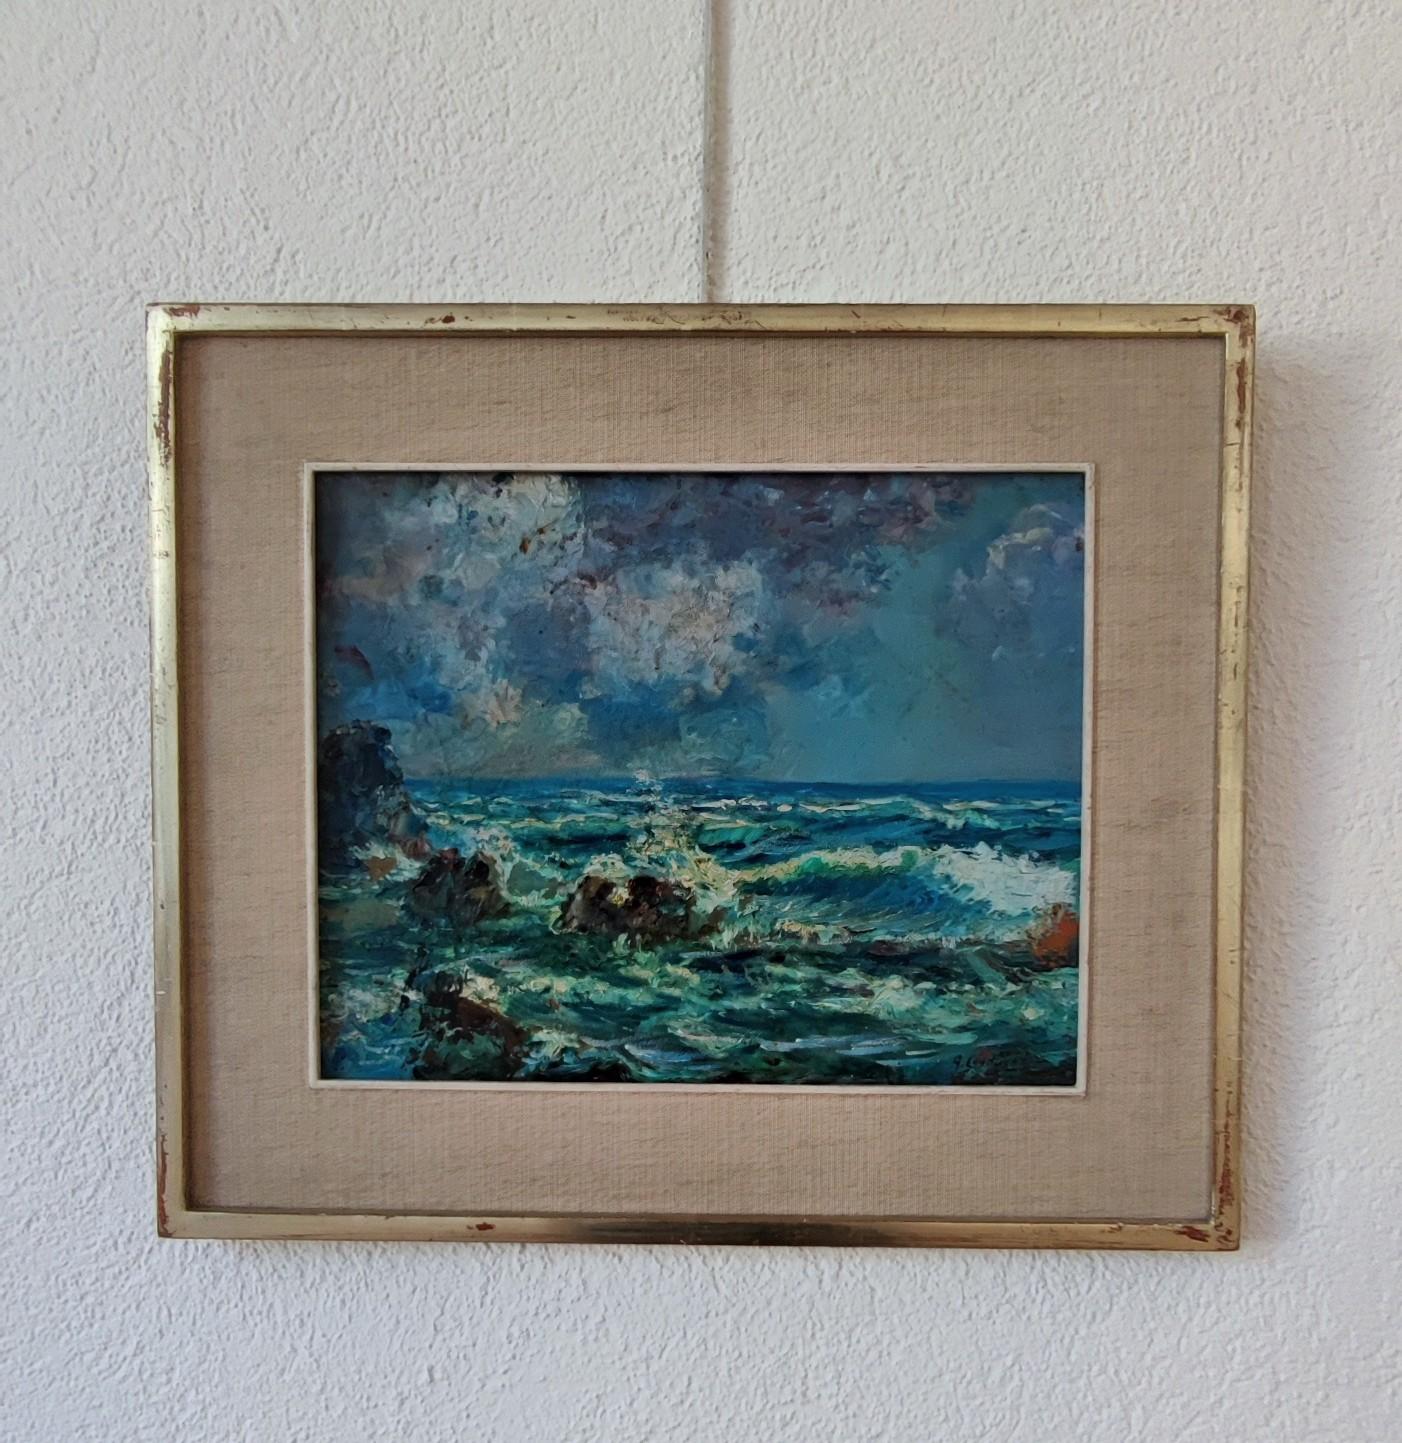 Sky and sea - Painting by Adolfo Carducci